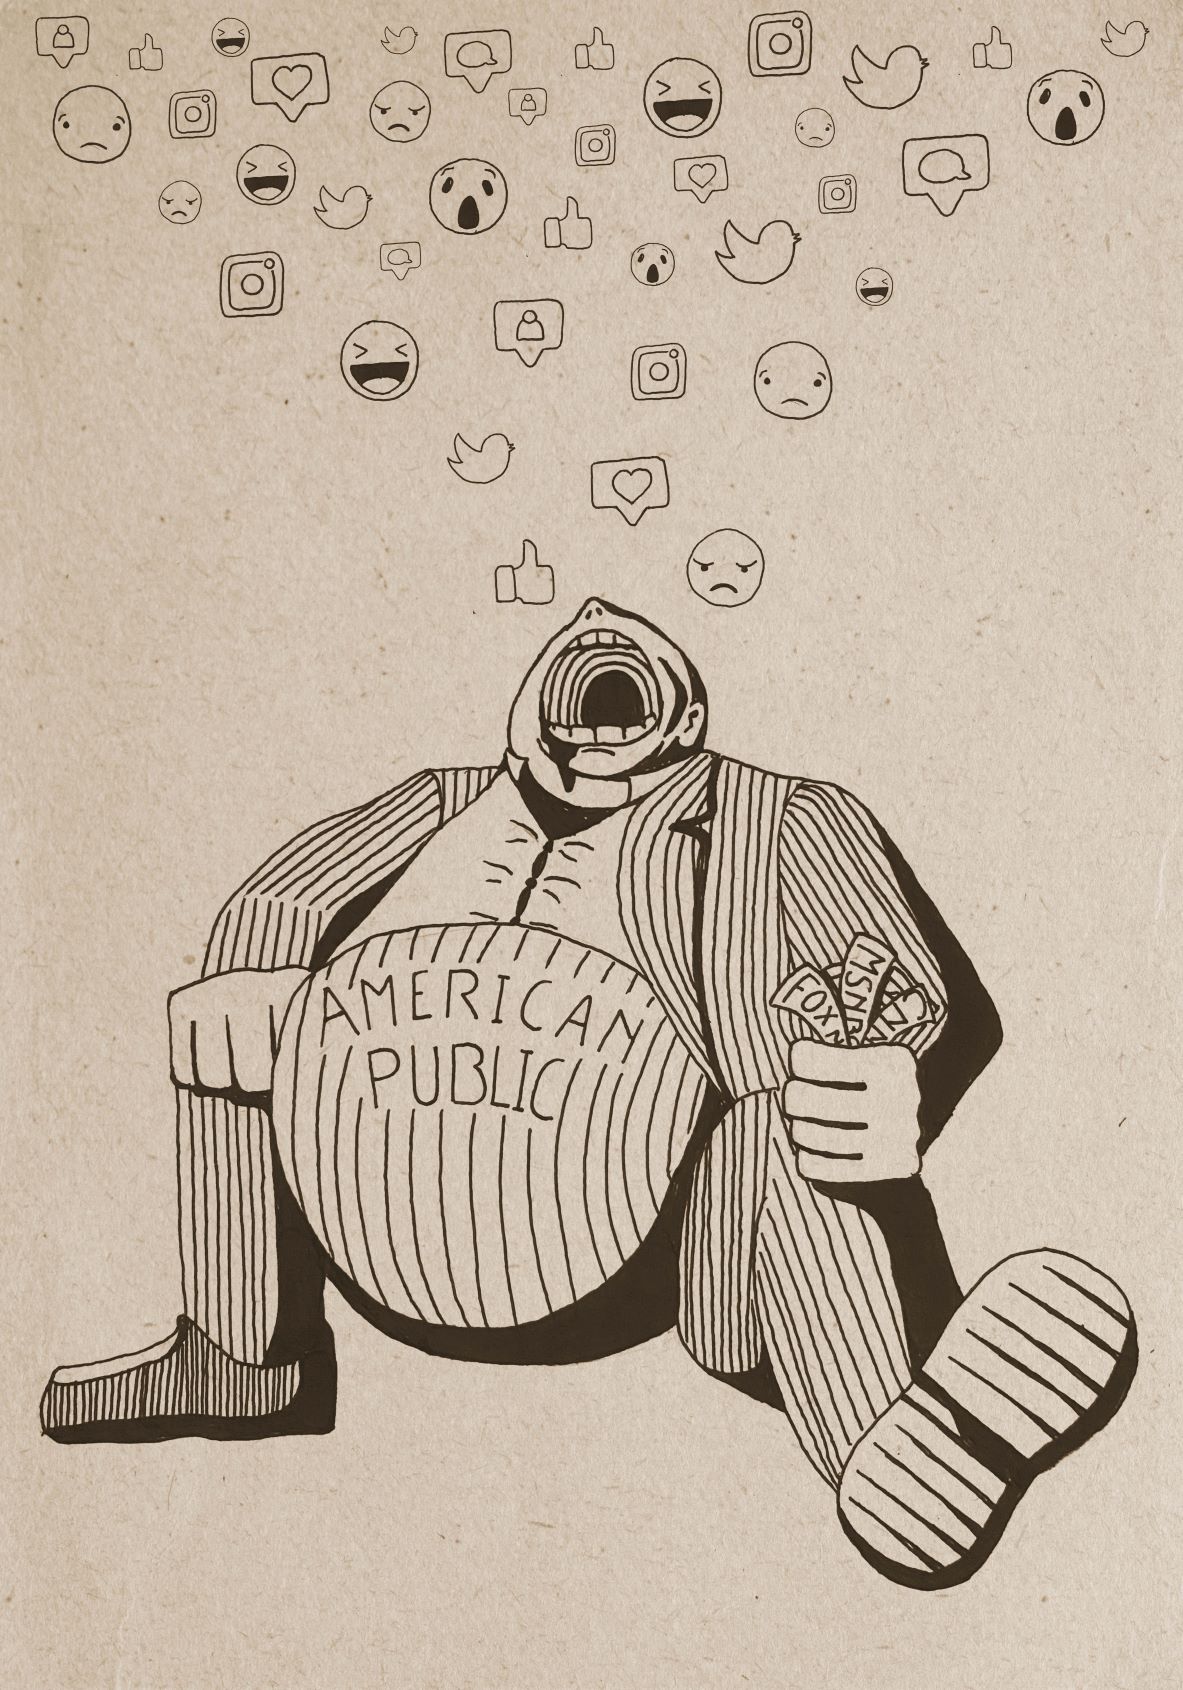 Image of man, labeled the American Public, eating emojis